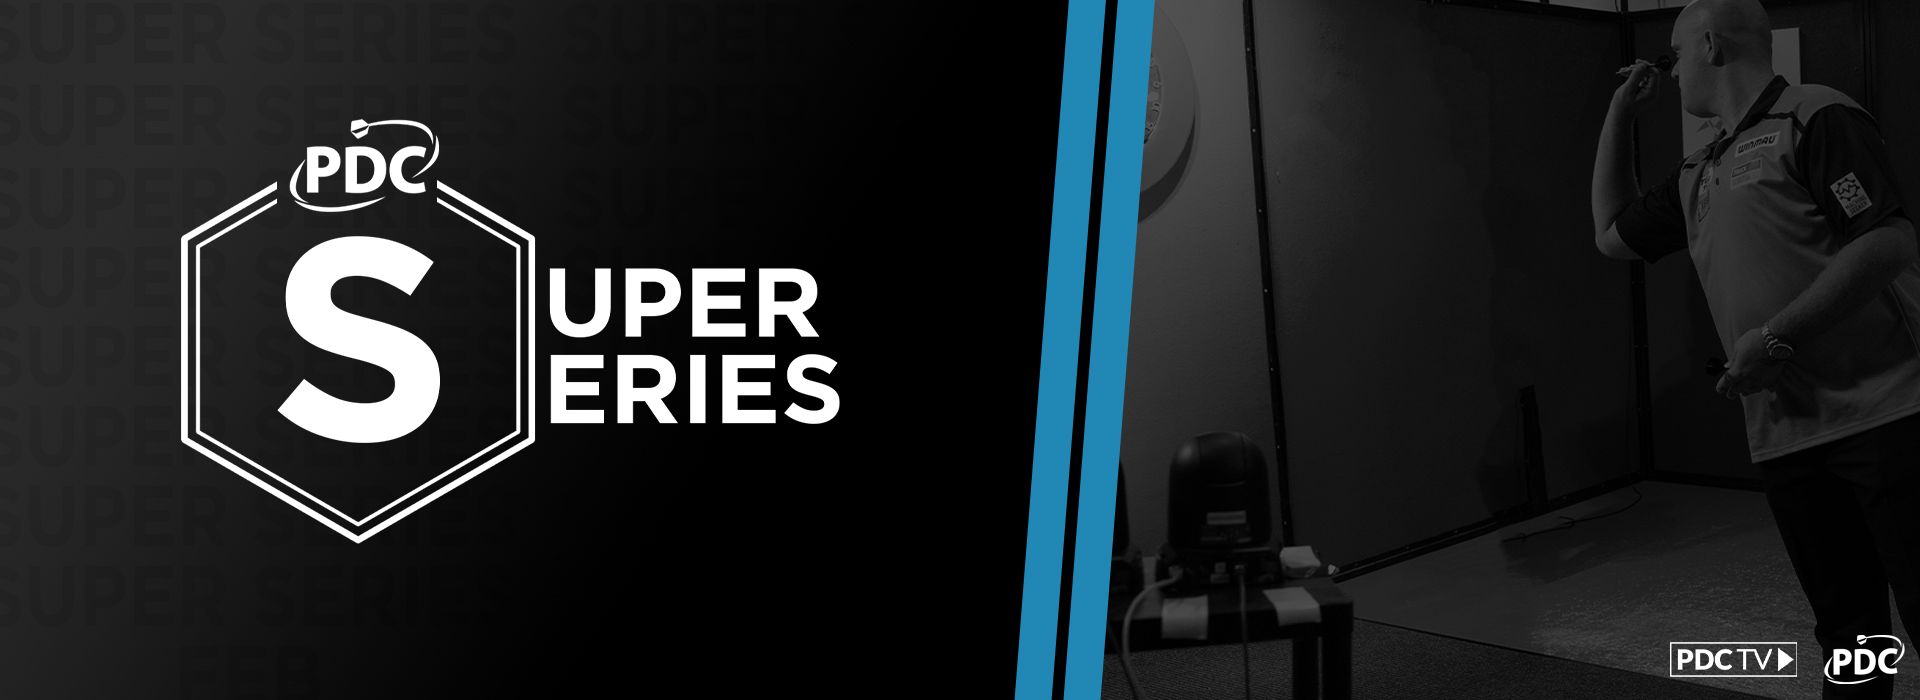 PDC Super Series: Day One Live Blog